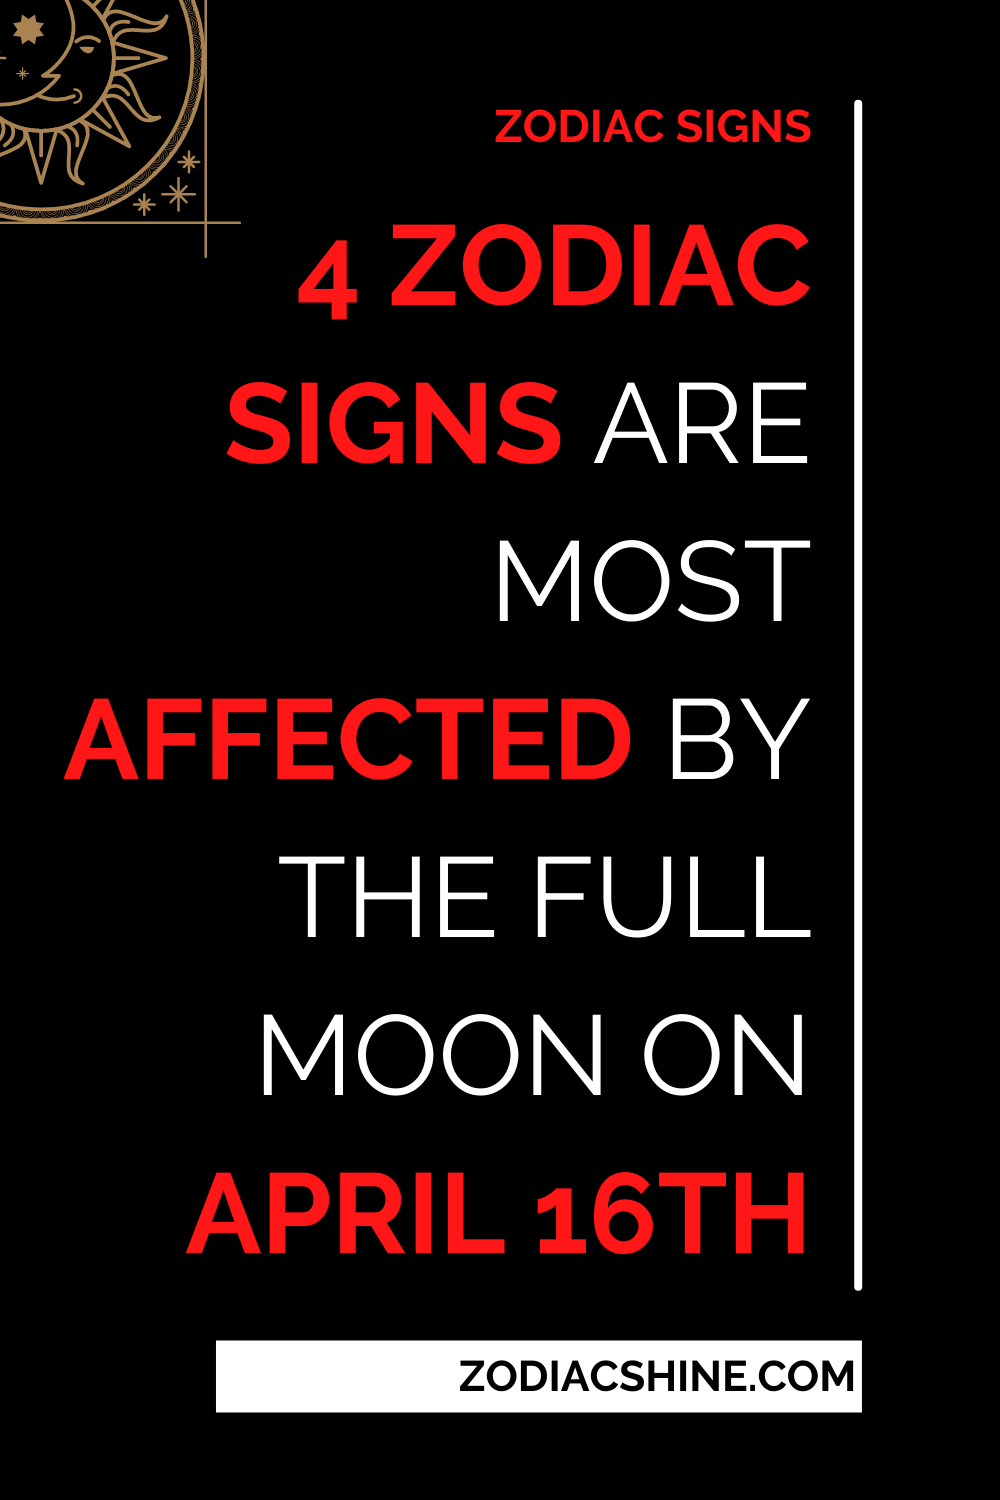 4 Zodiac Signs Are Most Affected By The Full Moon On April 16th